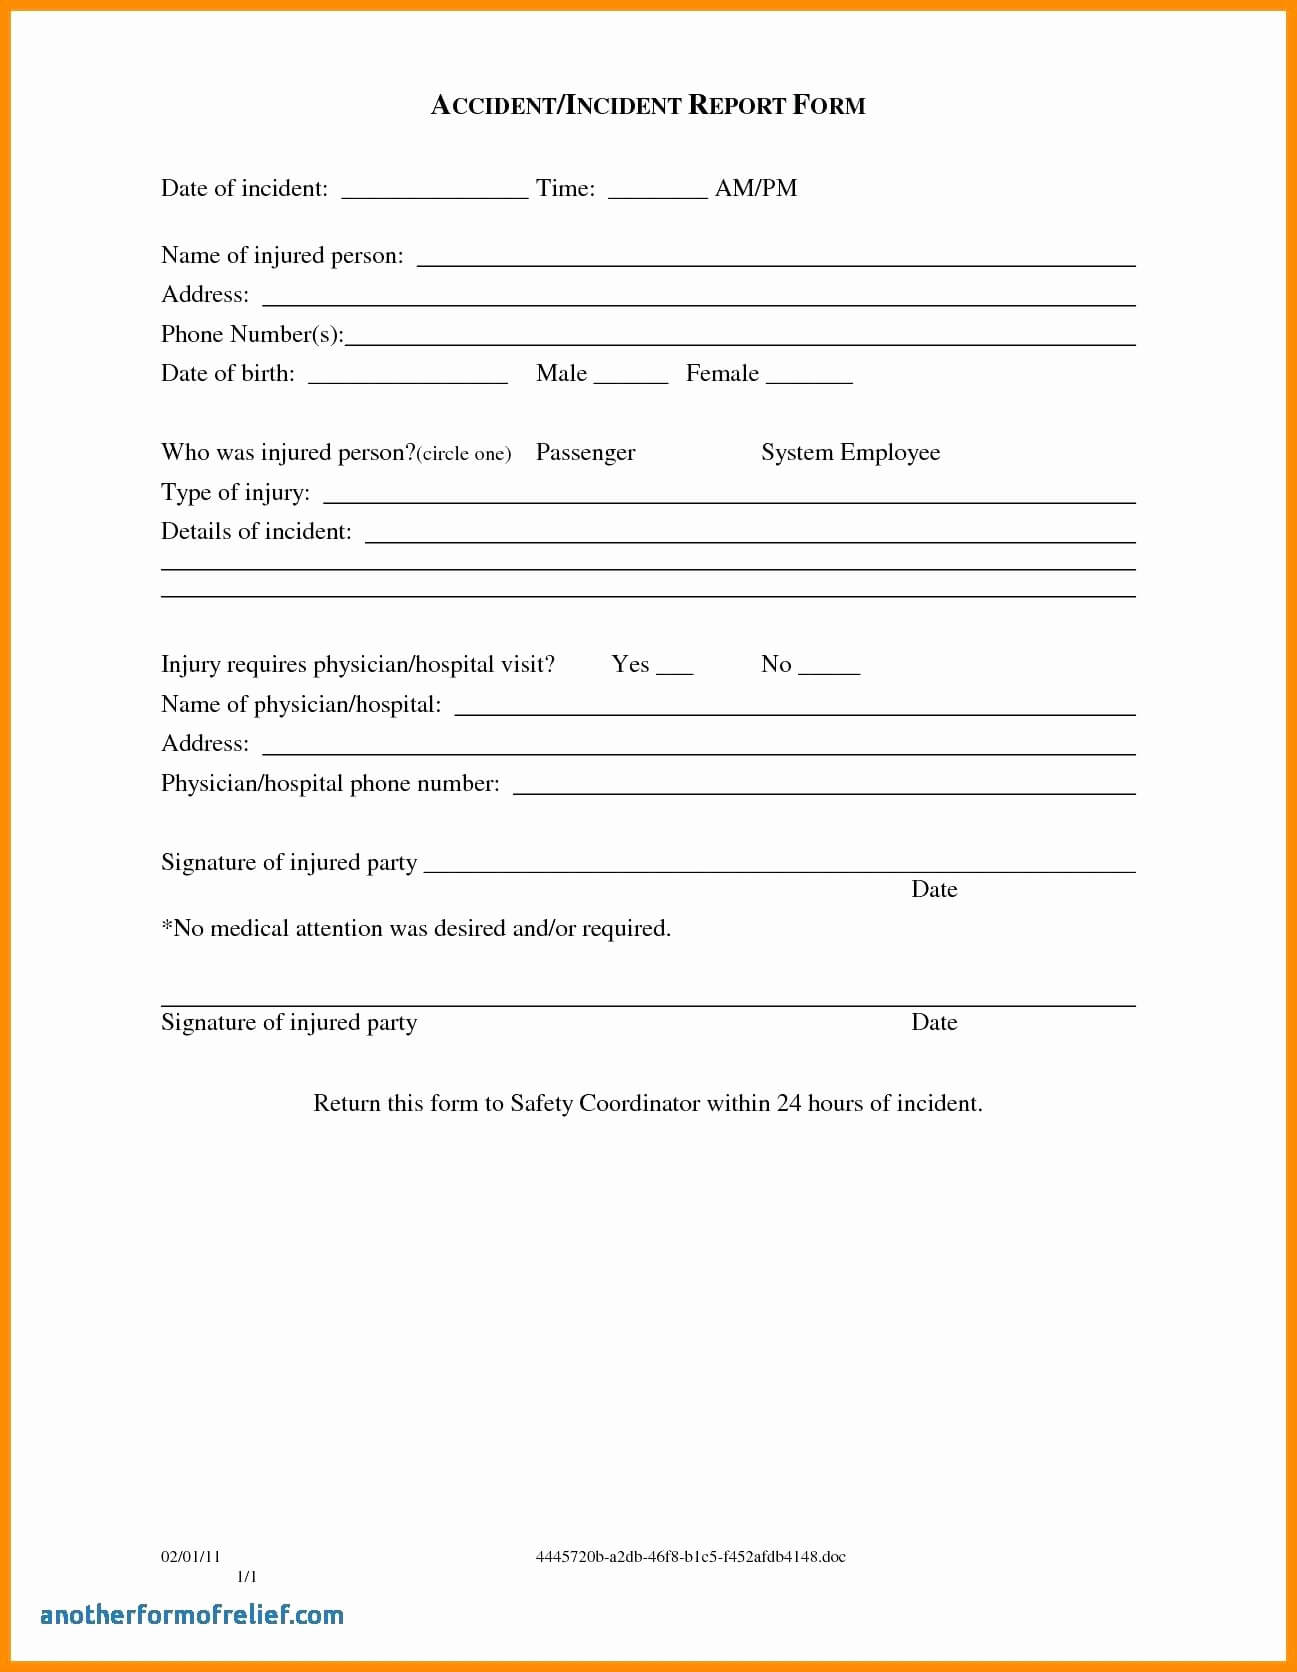 022 Template Ideas Accident Report Forms Incident Hazard Within Incident Hazard Report Form Template